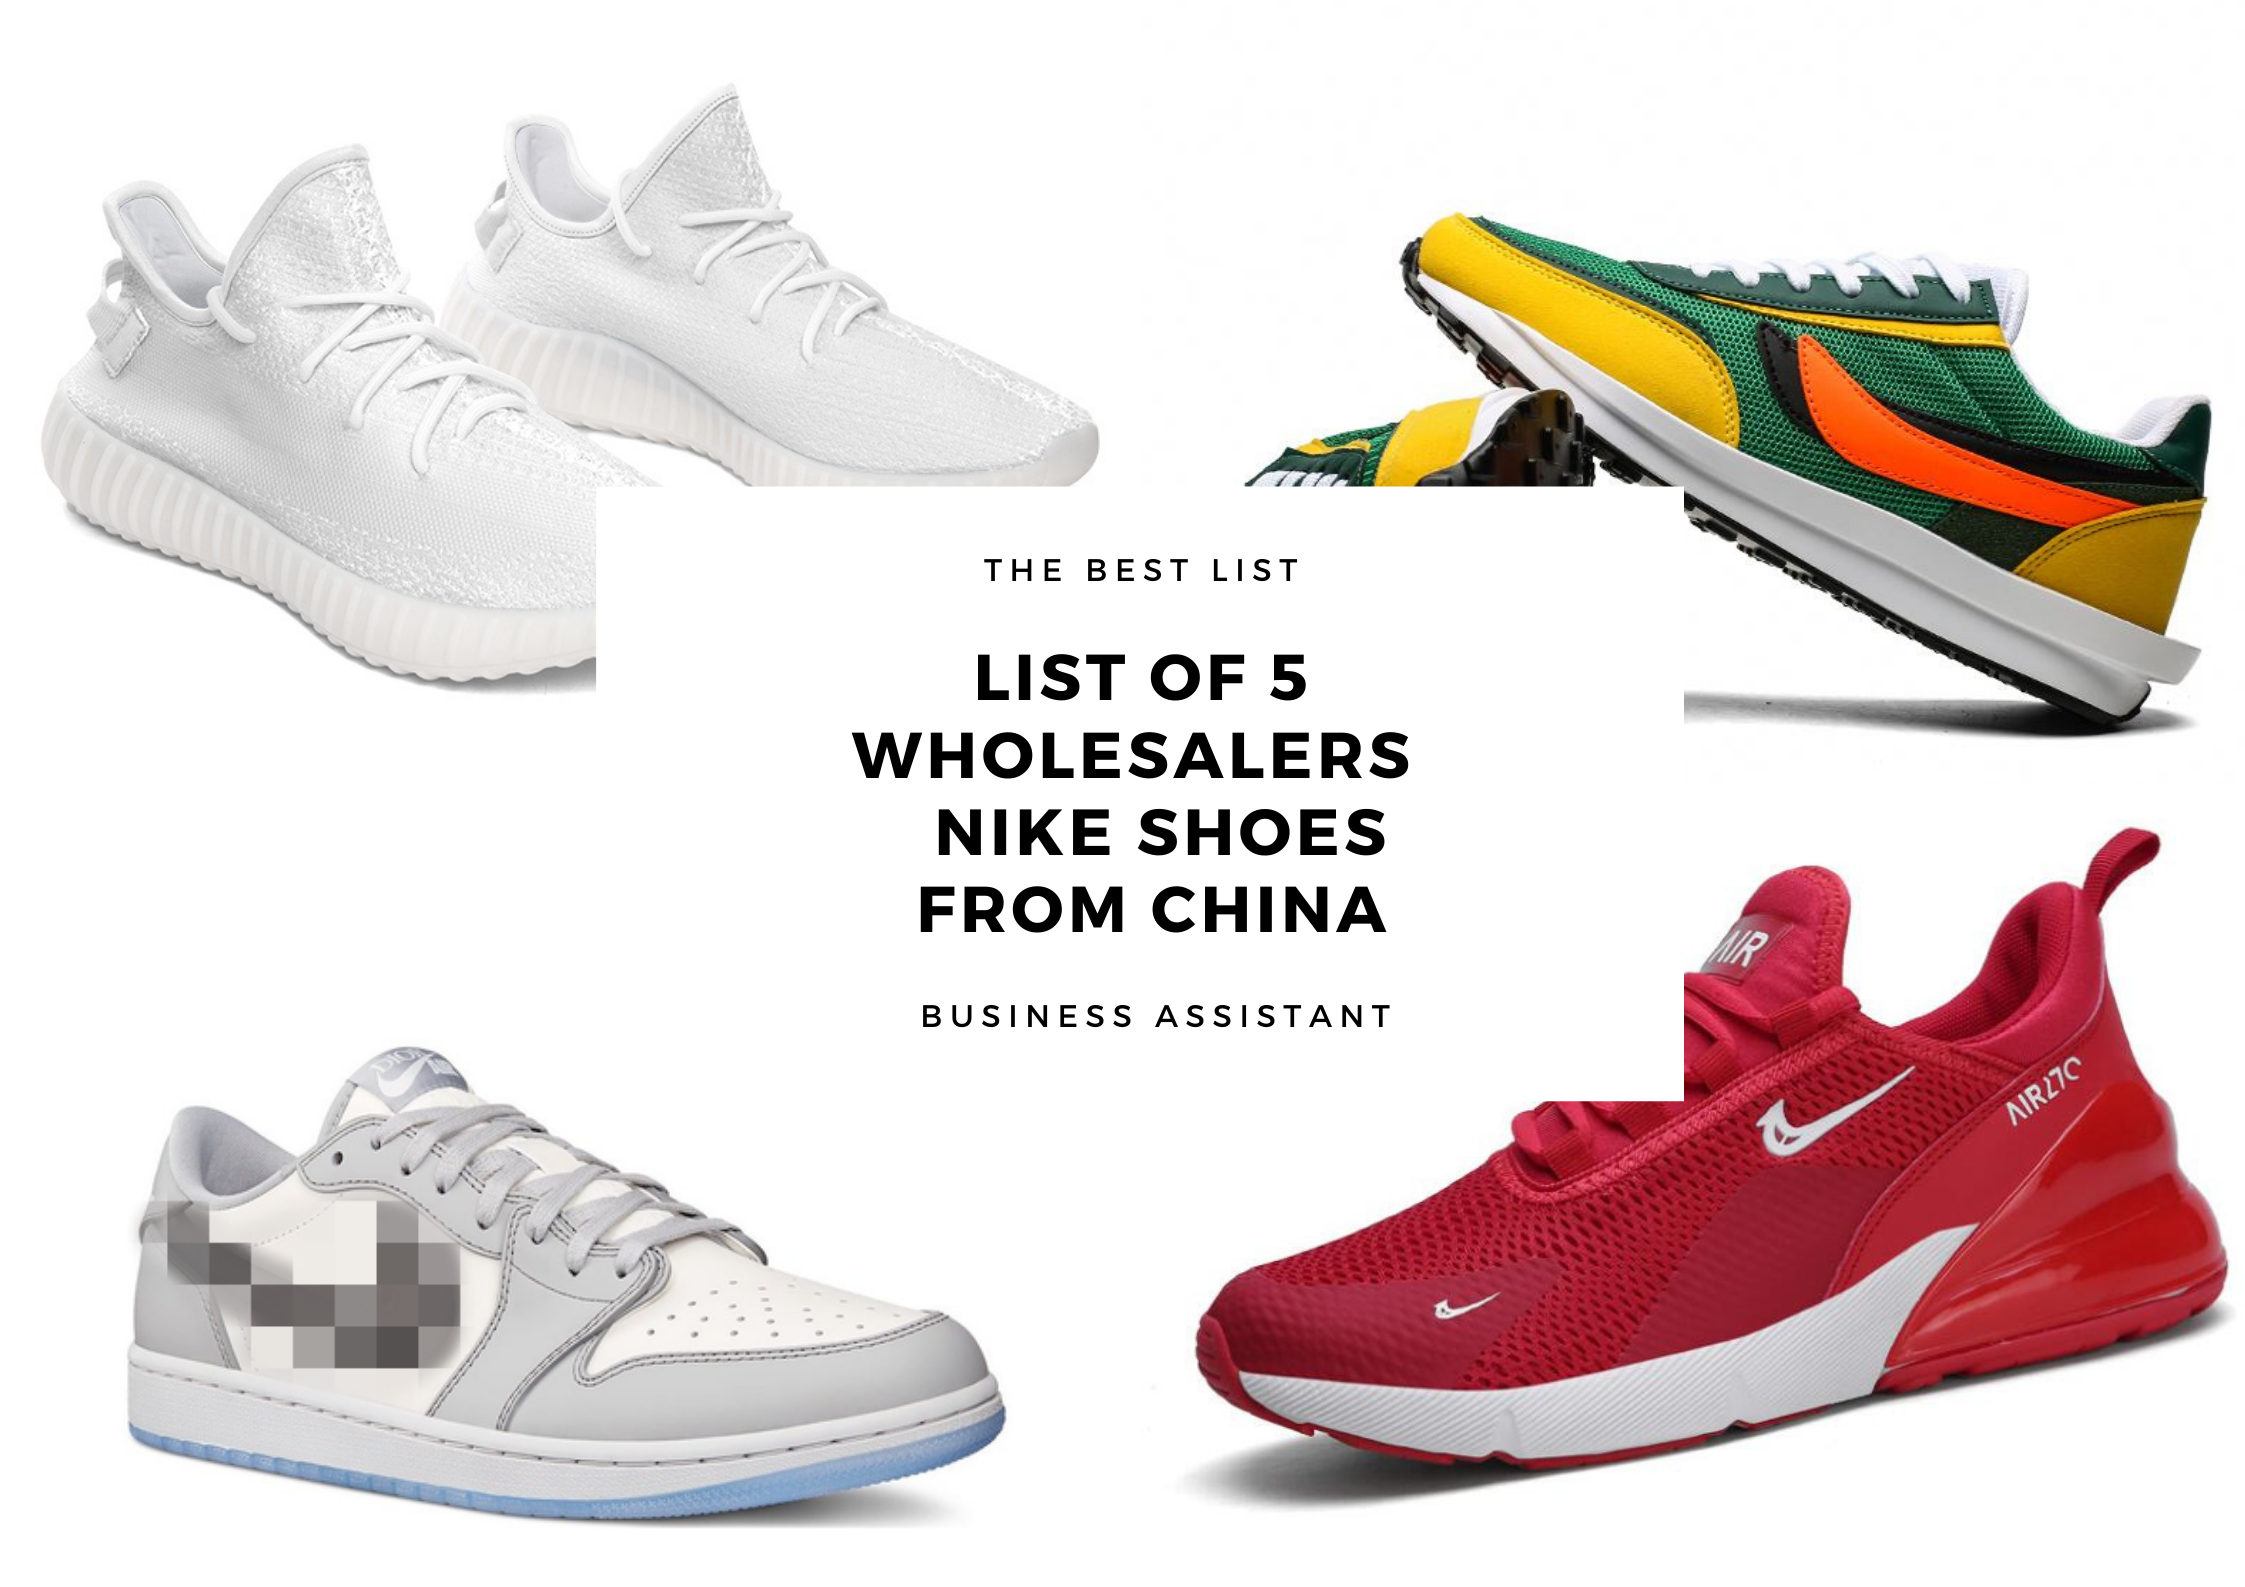 List of 5 NIKE Shoes wholesale/ /Vendor from China - Payhip